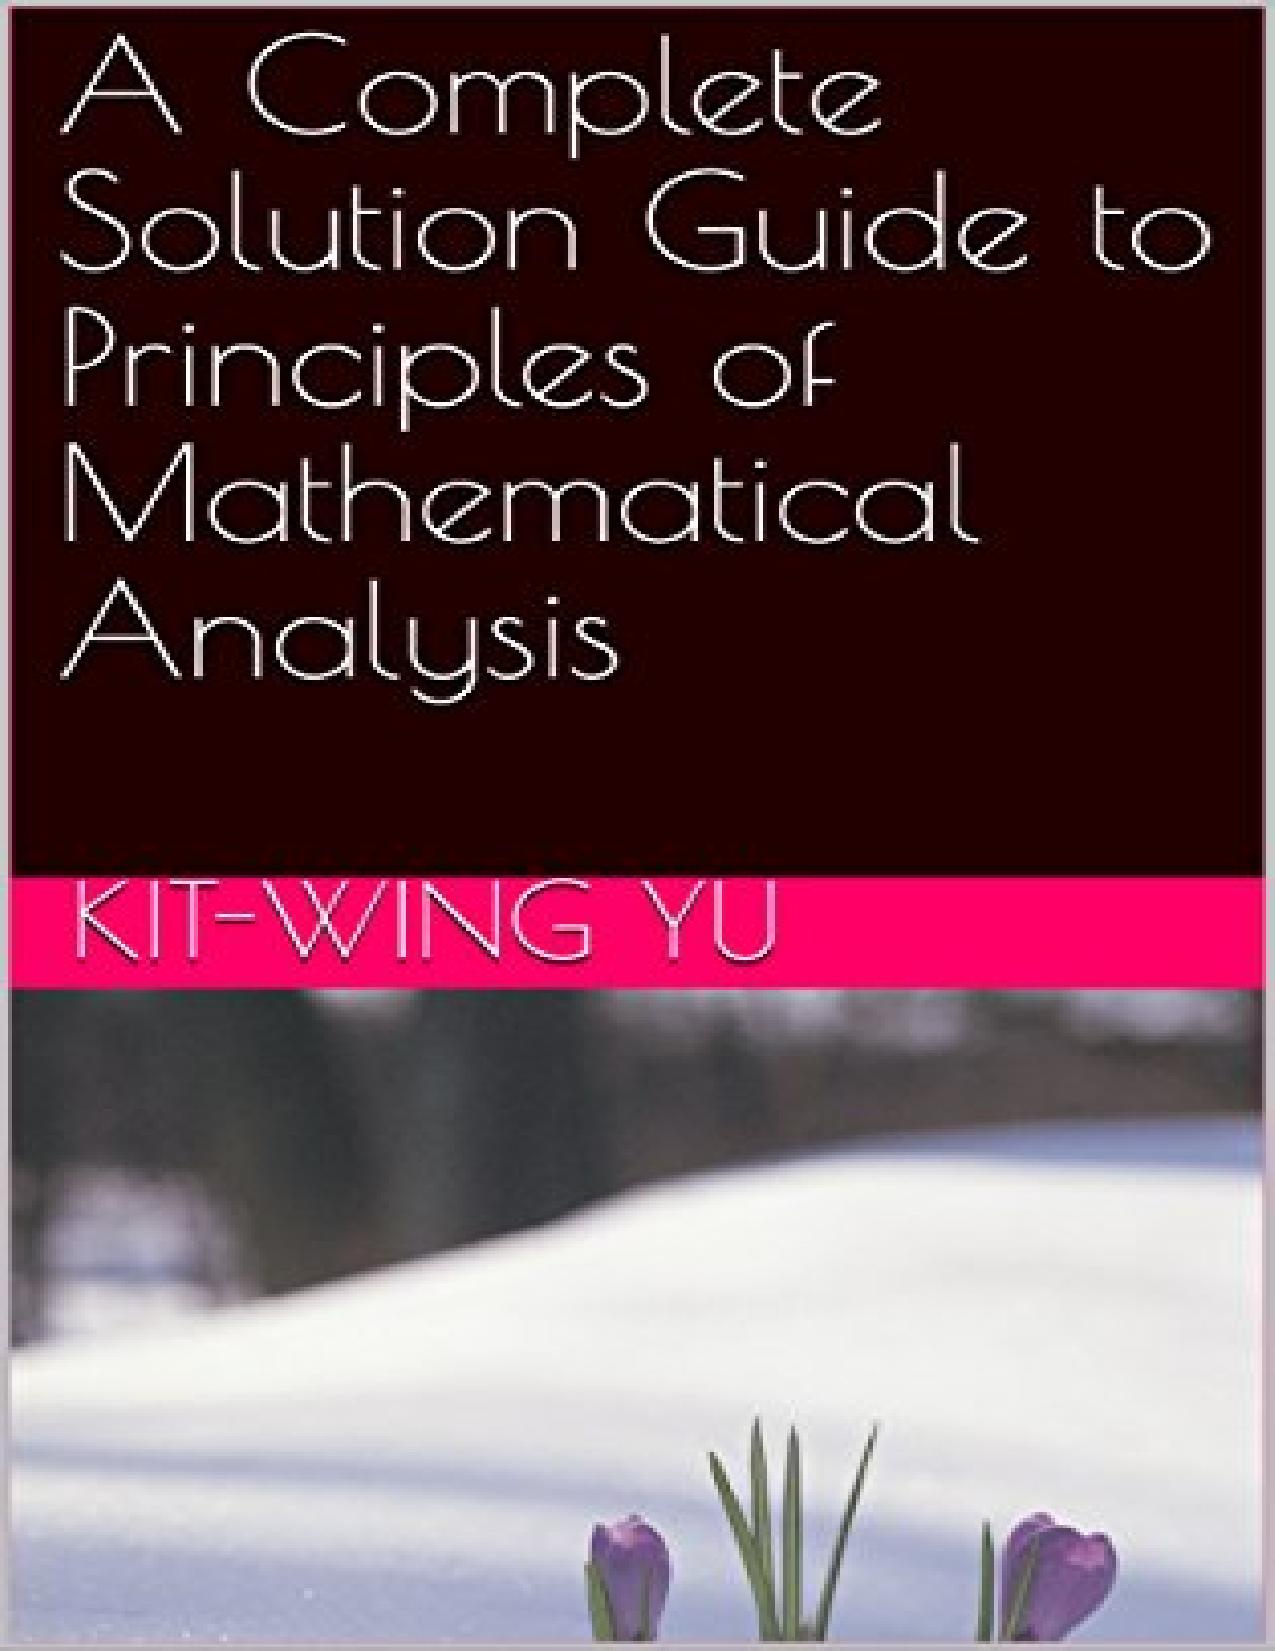 A Complete Solution Guide to Principles of Mathematical Analysis